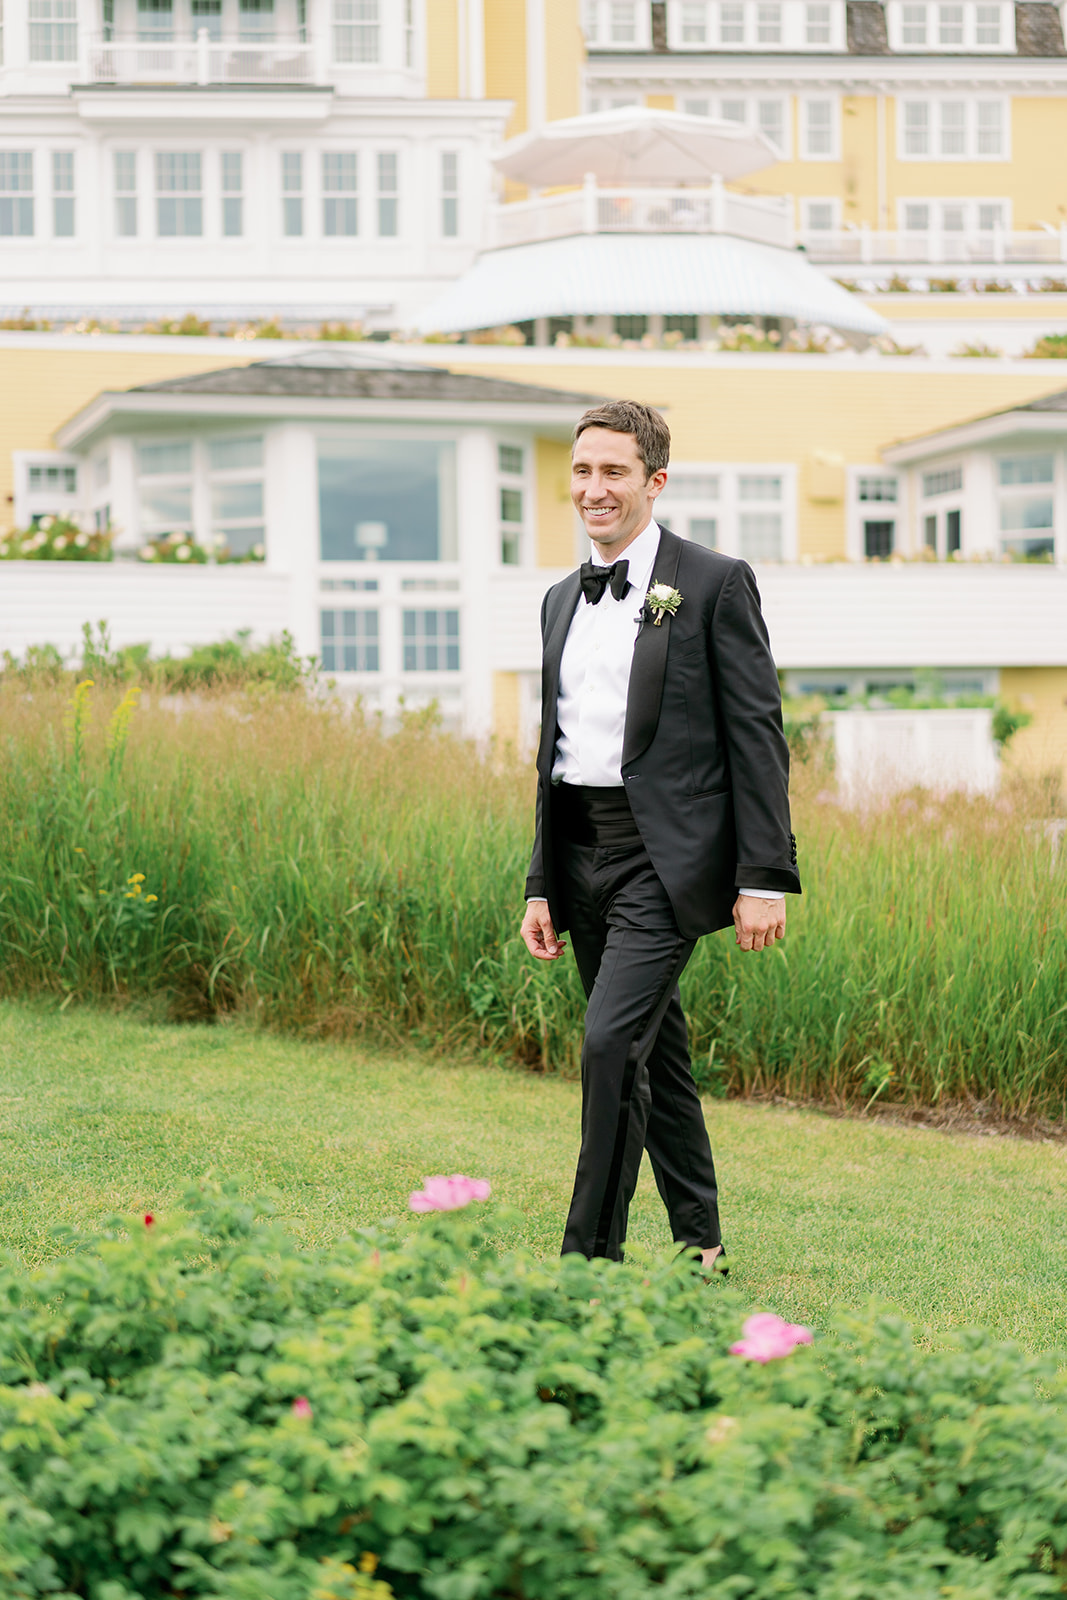 A groom seeing his bride for the first time on their wedding day outside Ocean House in Rhode Island.